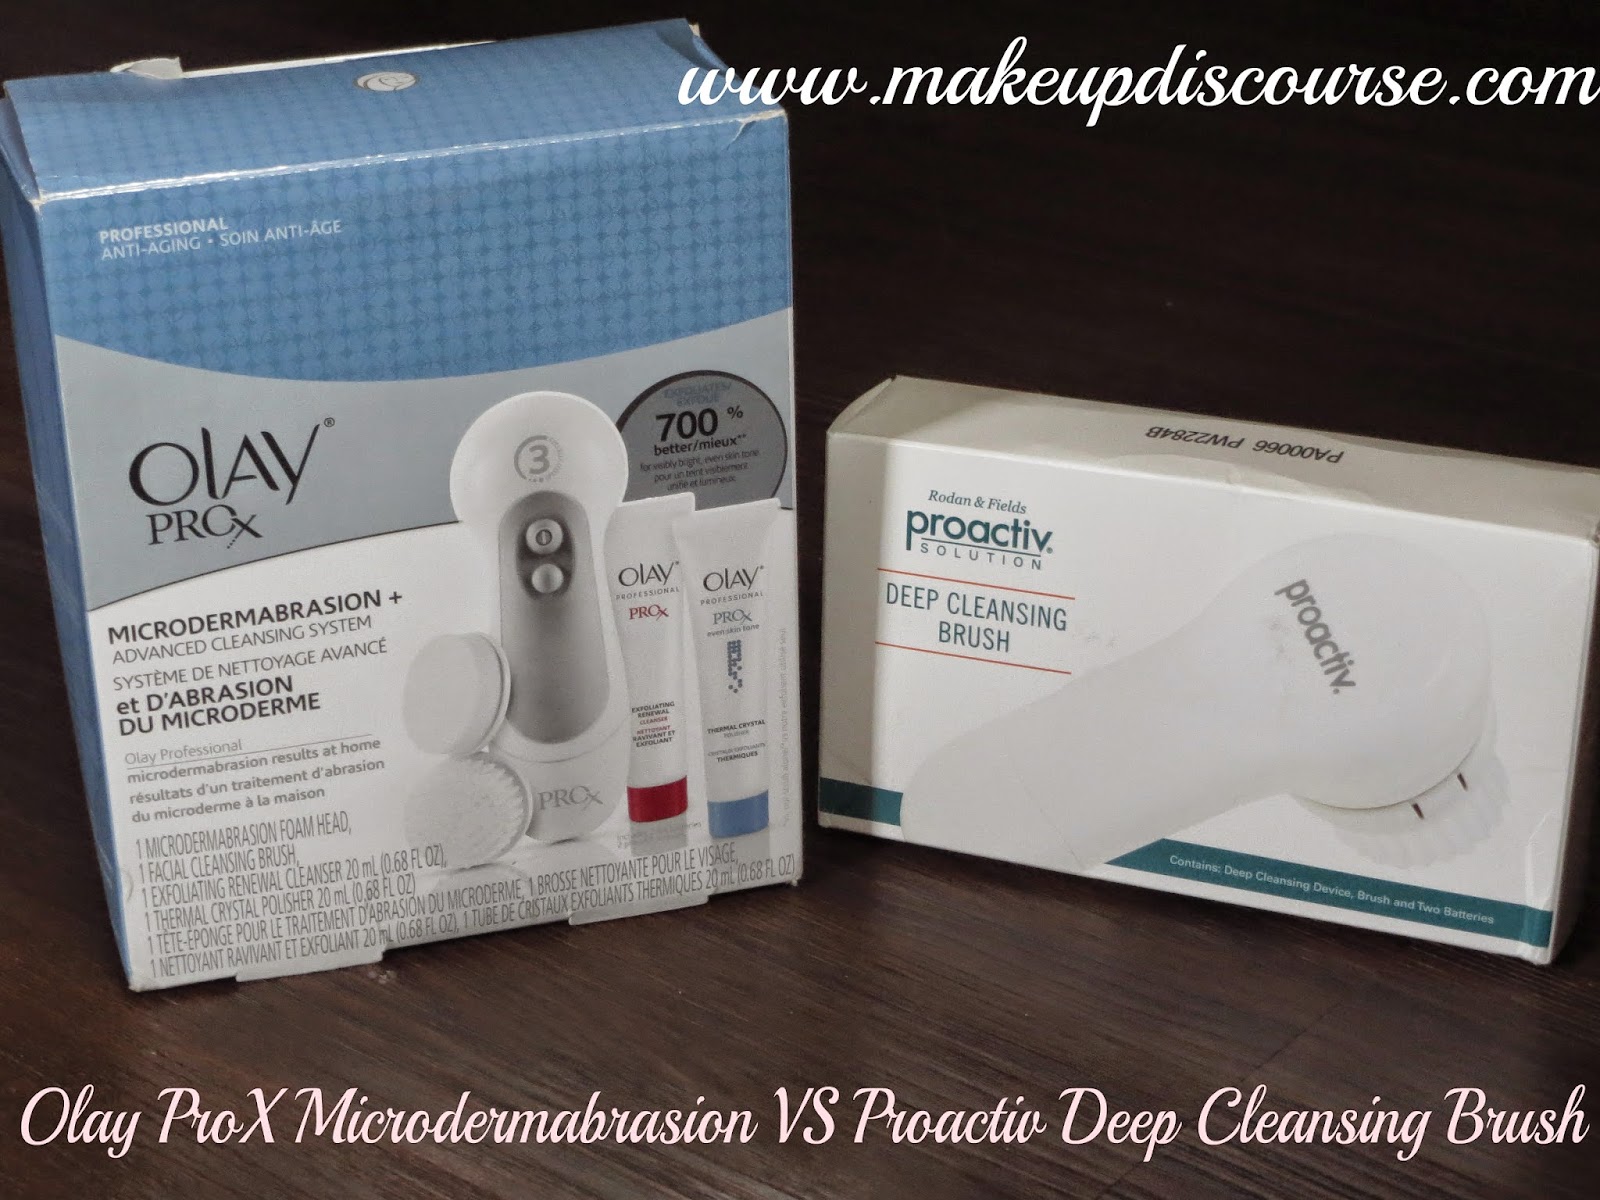 Olay Prox Microdermabrasion + Advanced Cleansing System, Proactiv Deep Cleansing Brush Review India